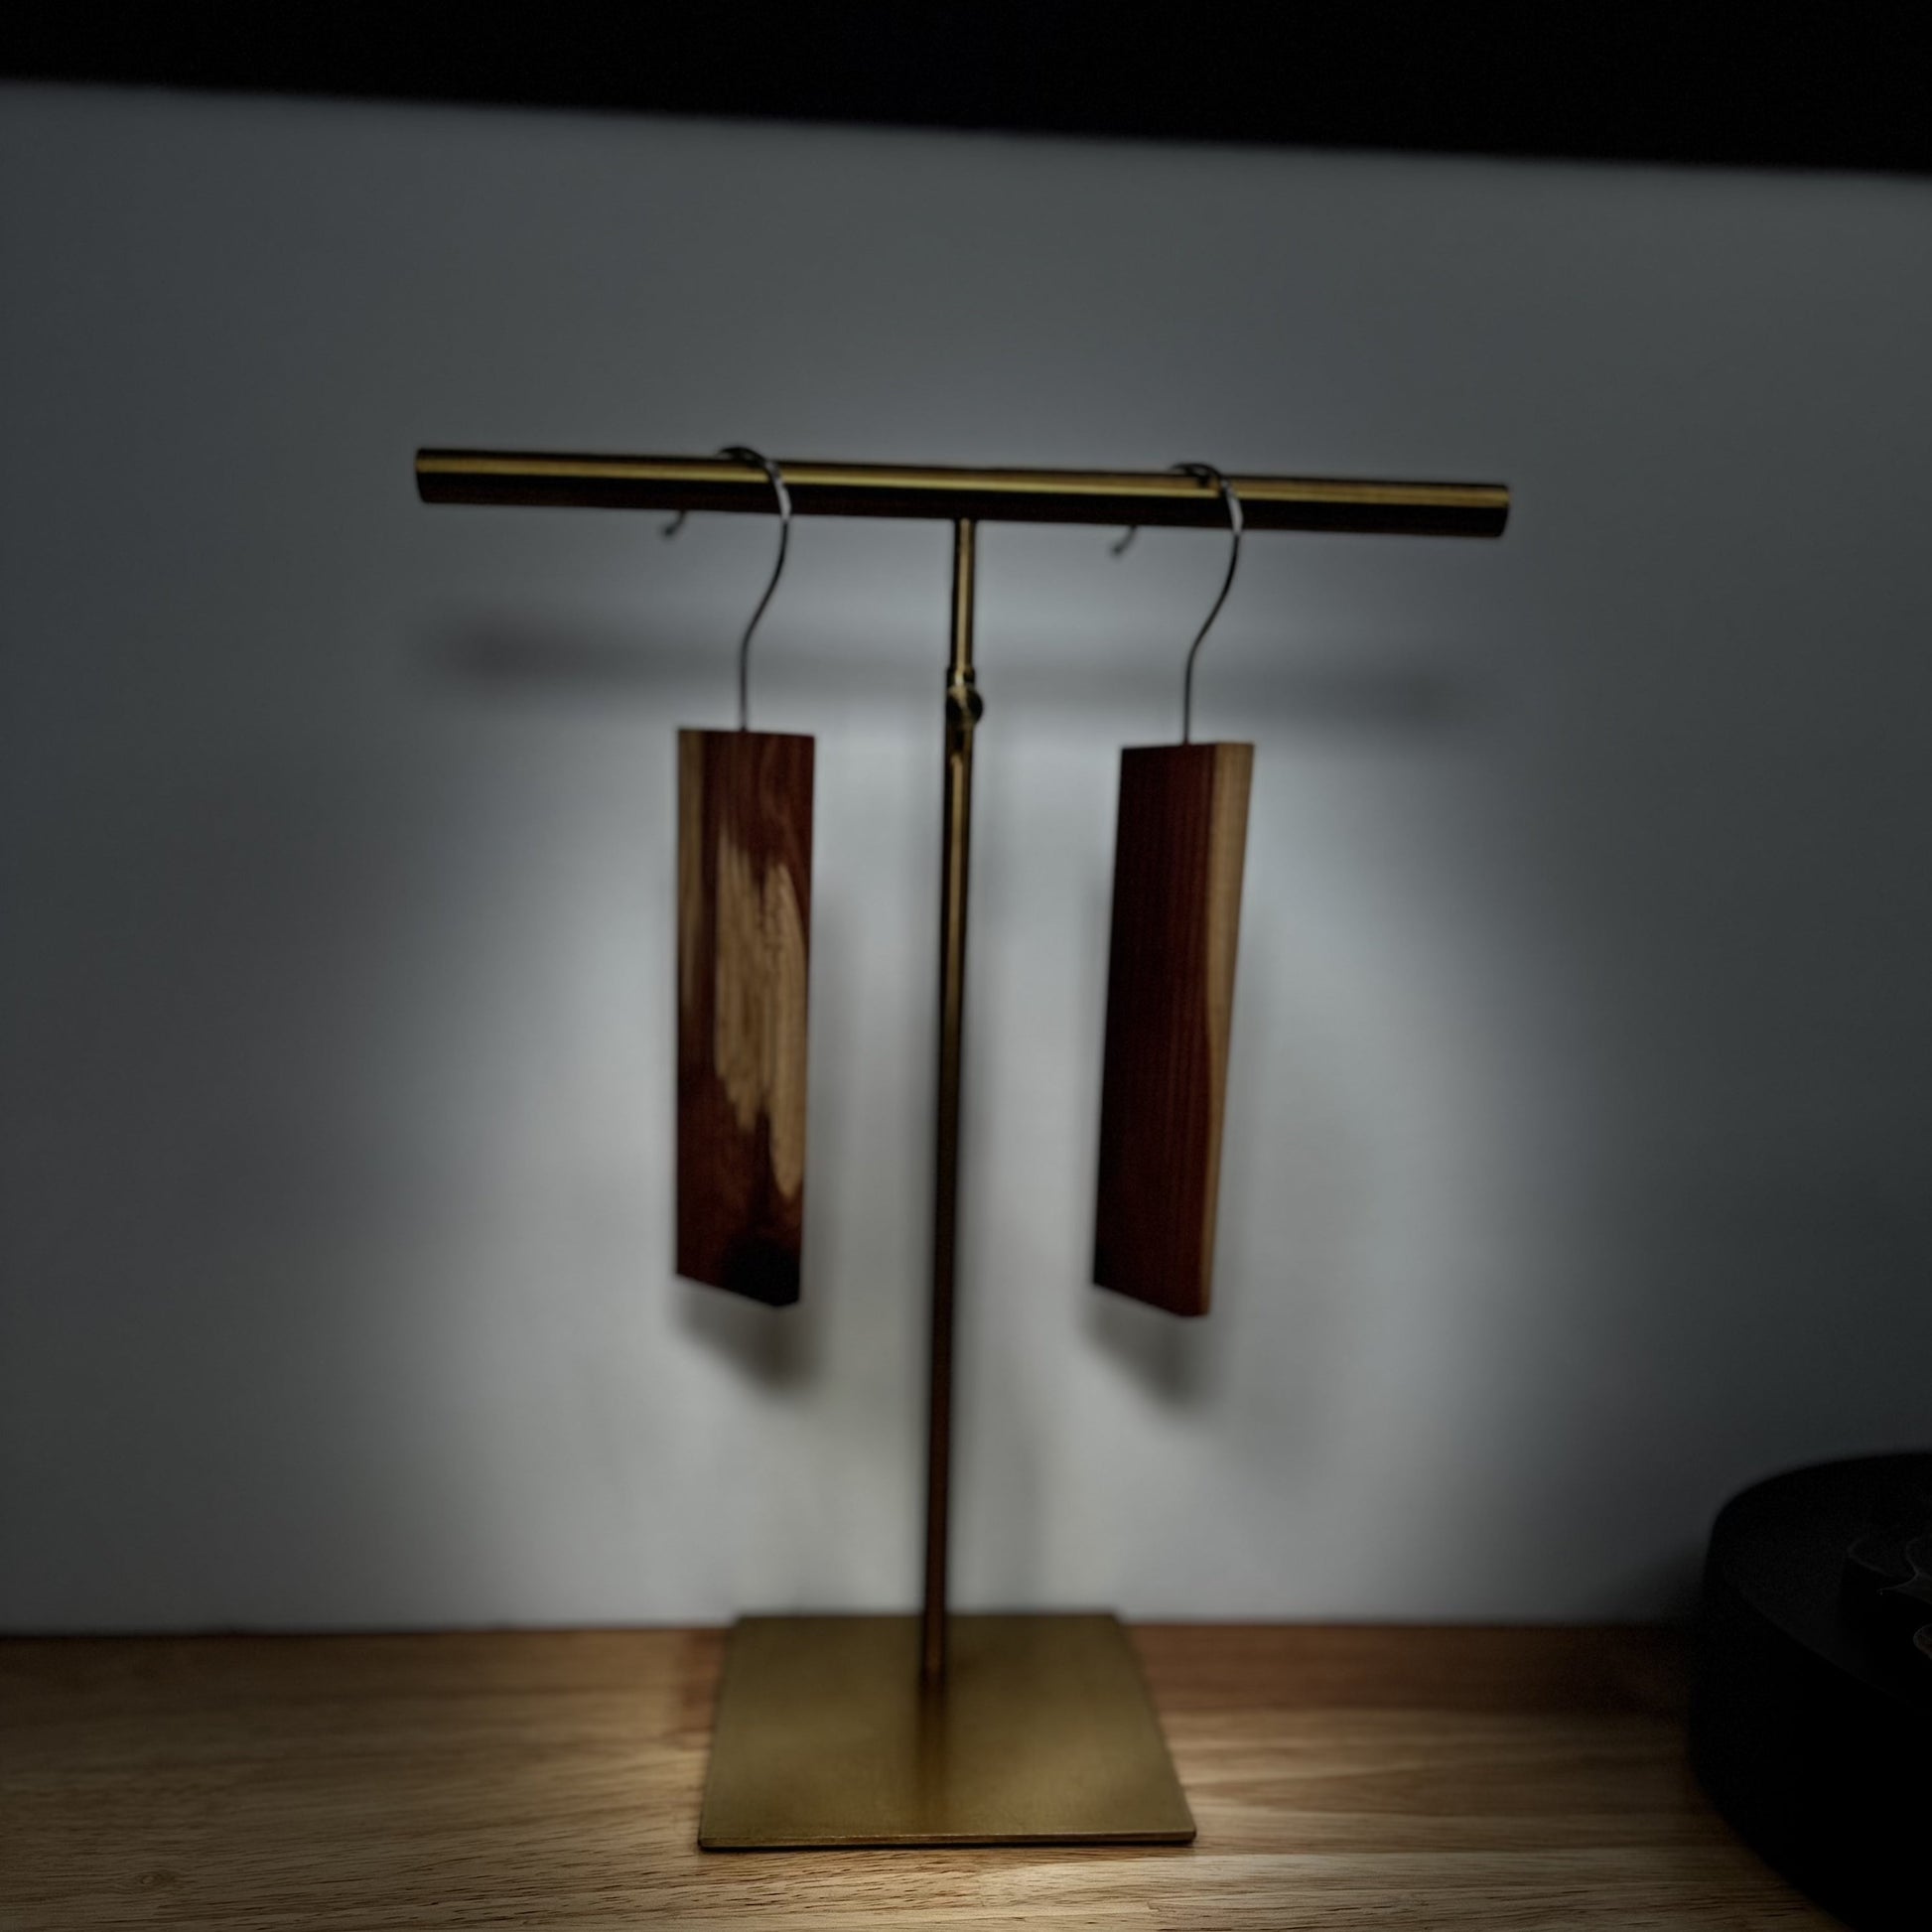 A desk lamp illuminating two wooden headphones on a stand, near Scented Cedar Wood Hangups with Hook for Closets.